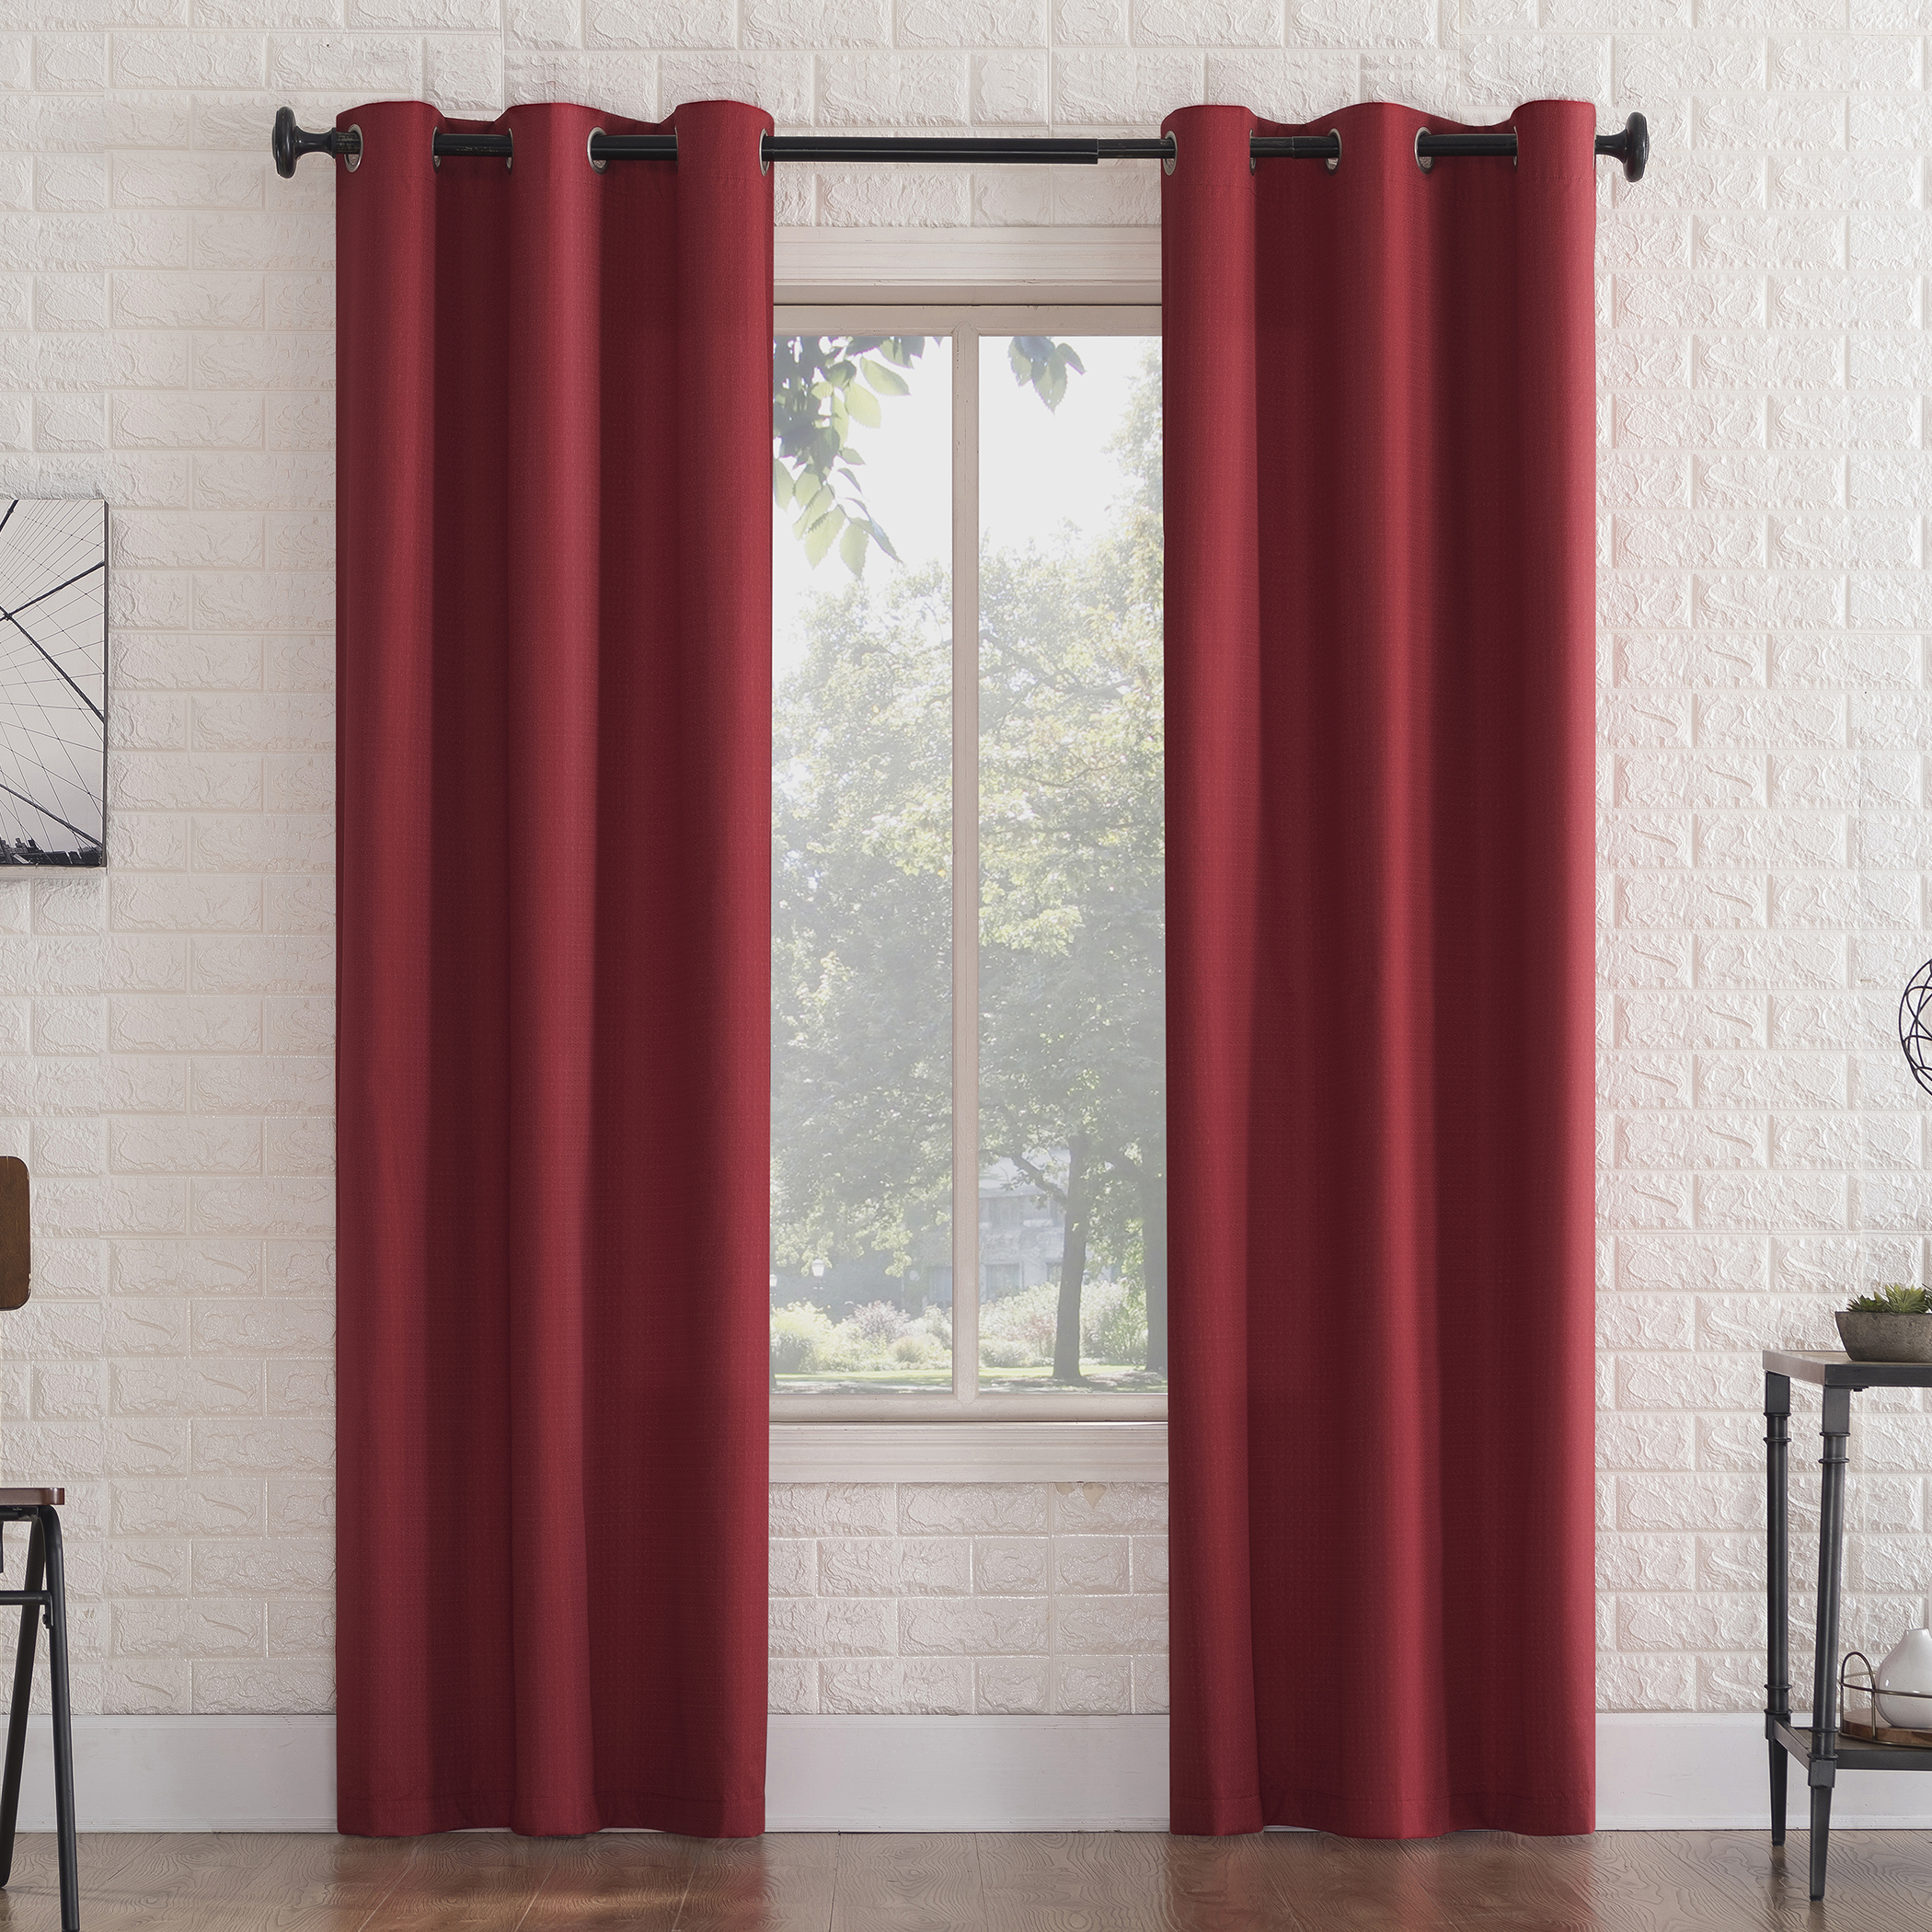 Red insulated curtains